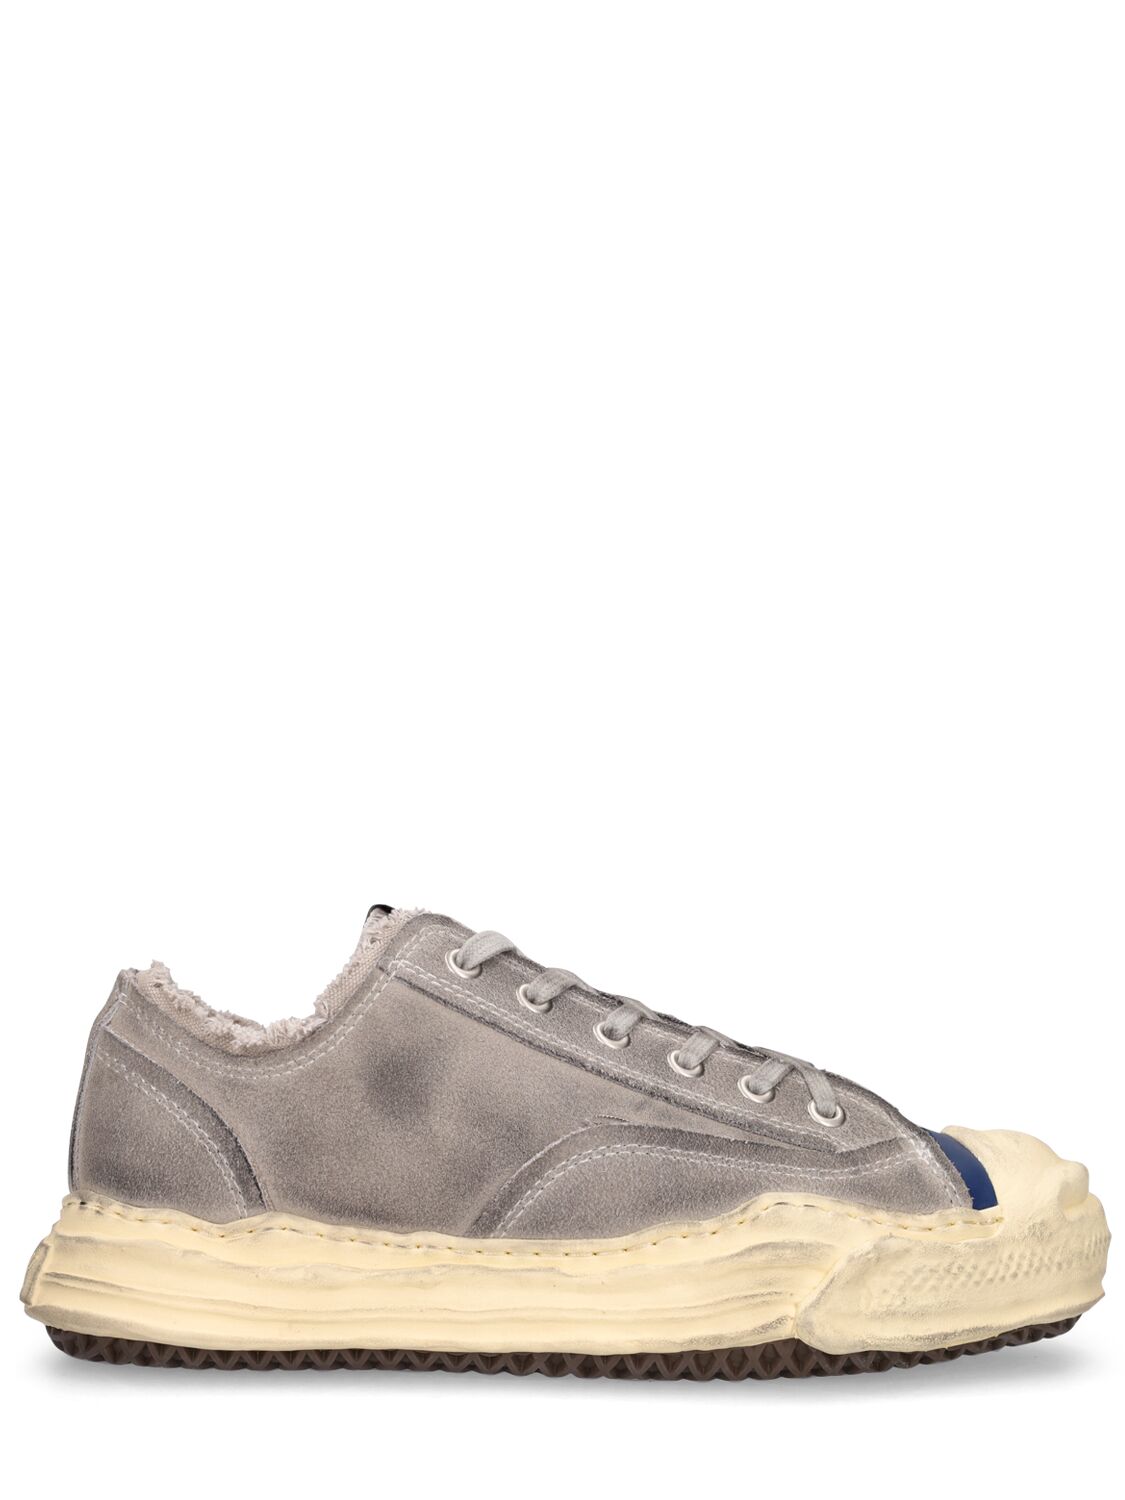 Miharayasuhiro Bed Jw Ford Blakey Low Top Trainers In Grey